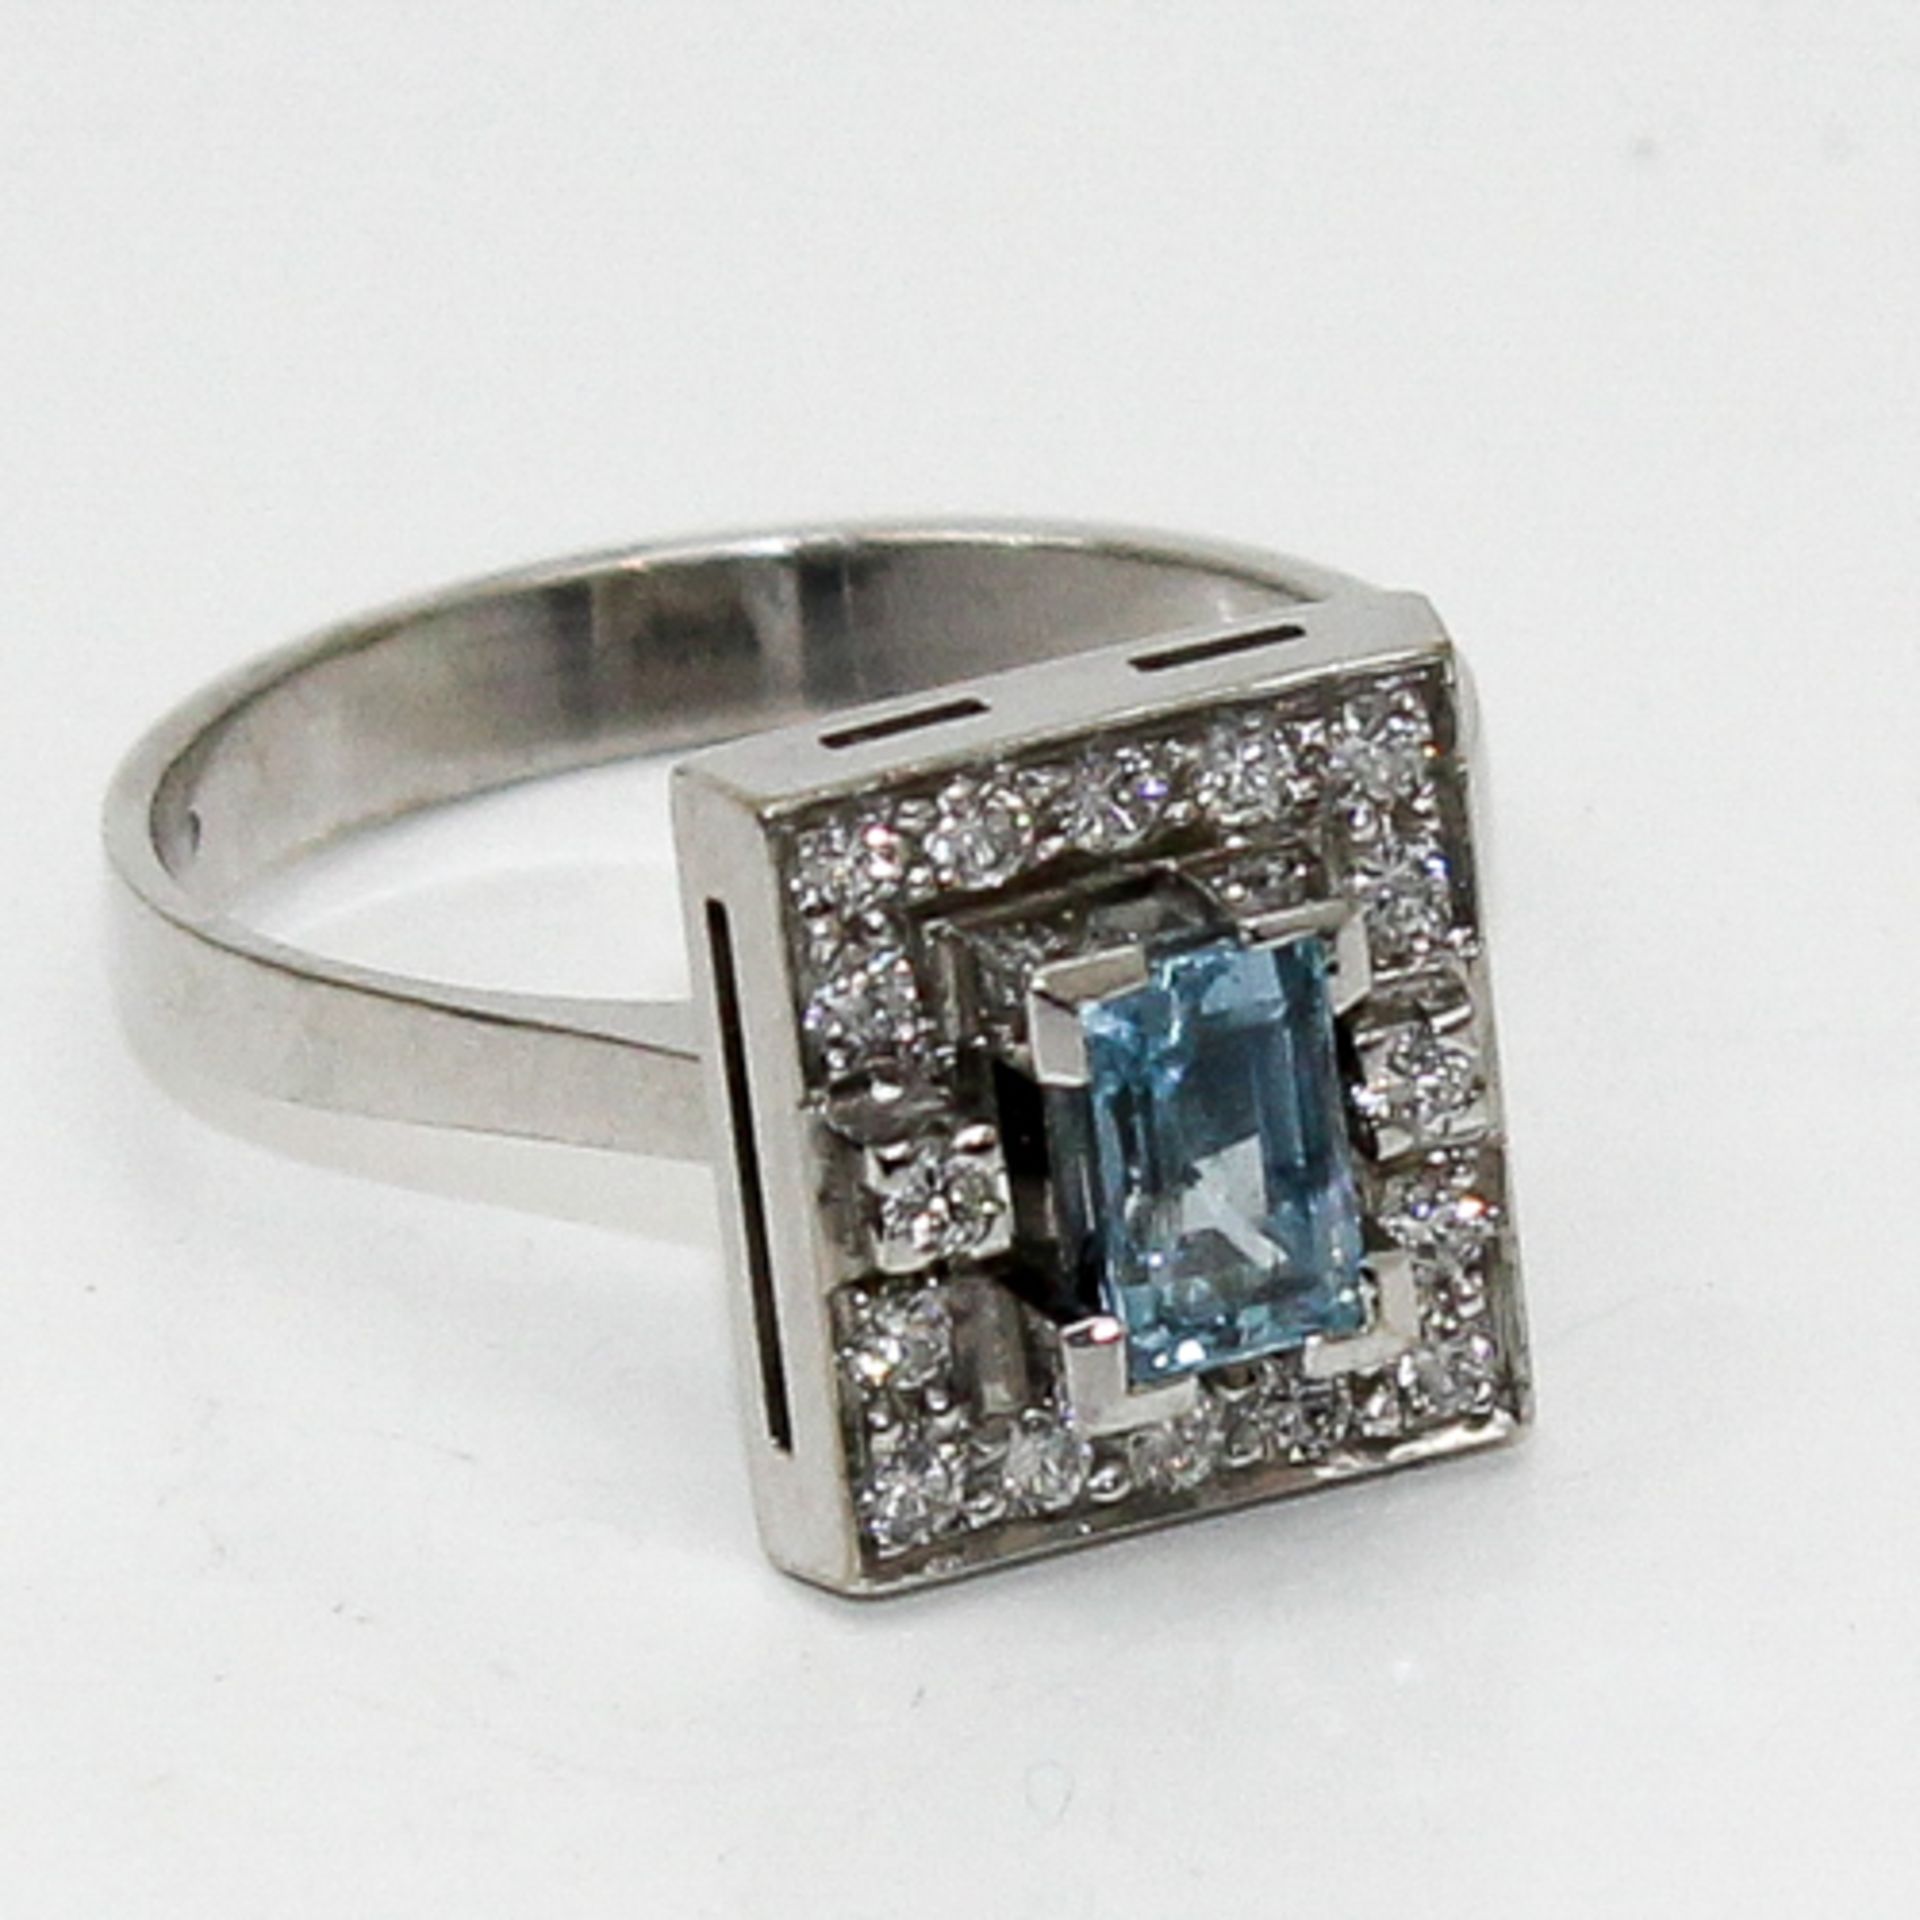 18KWG LADIES BLUE TOPAZ AND DIAMOND RING Diamonds are approximately 0.90 carat total weight.